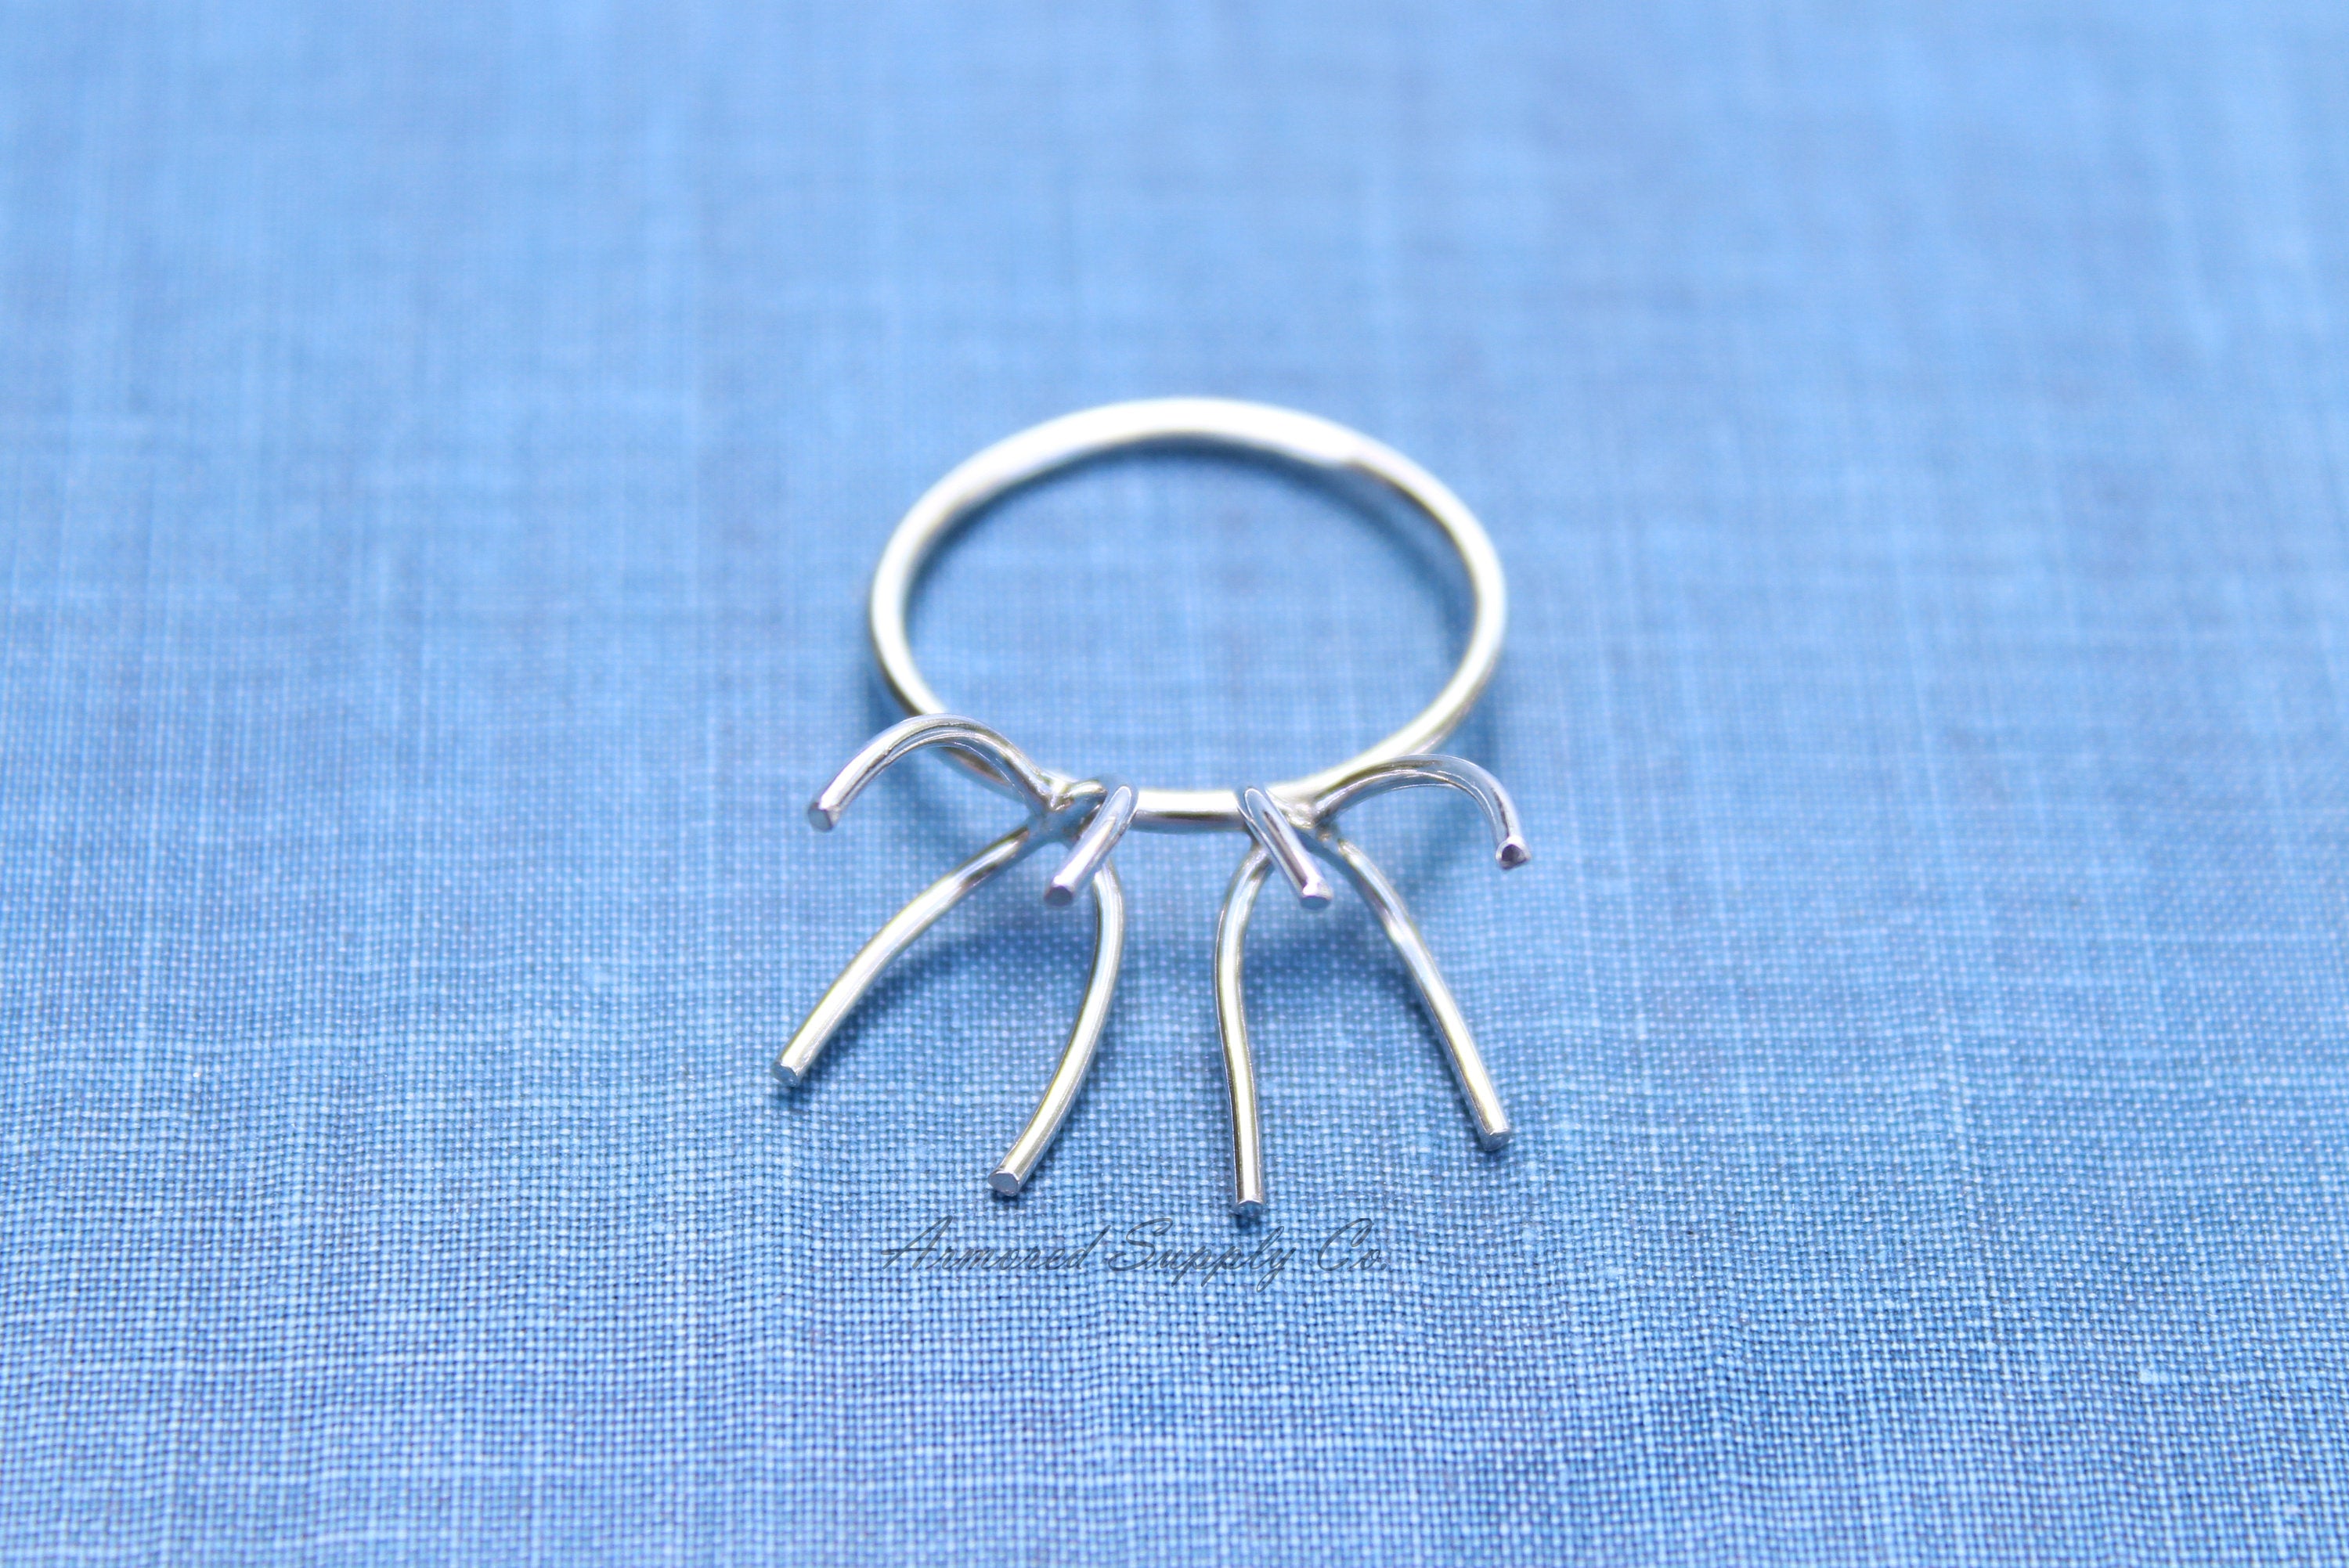 Silver Double Claw Prong Raw Stone Ring Blank, Prong Silver Band, Wholesale Ring, Raw Stone, Design Your Ring, DIY Jewelry, Jewelry Supplies